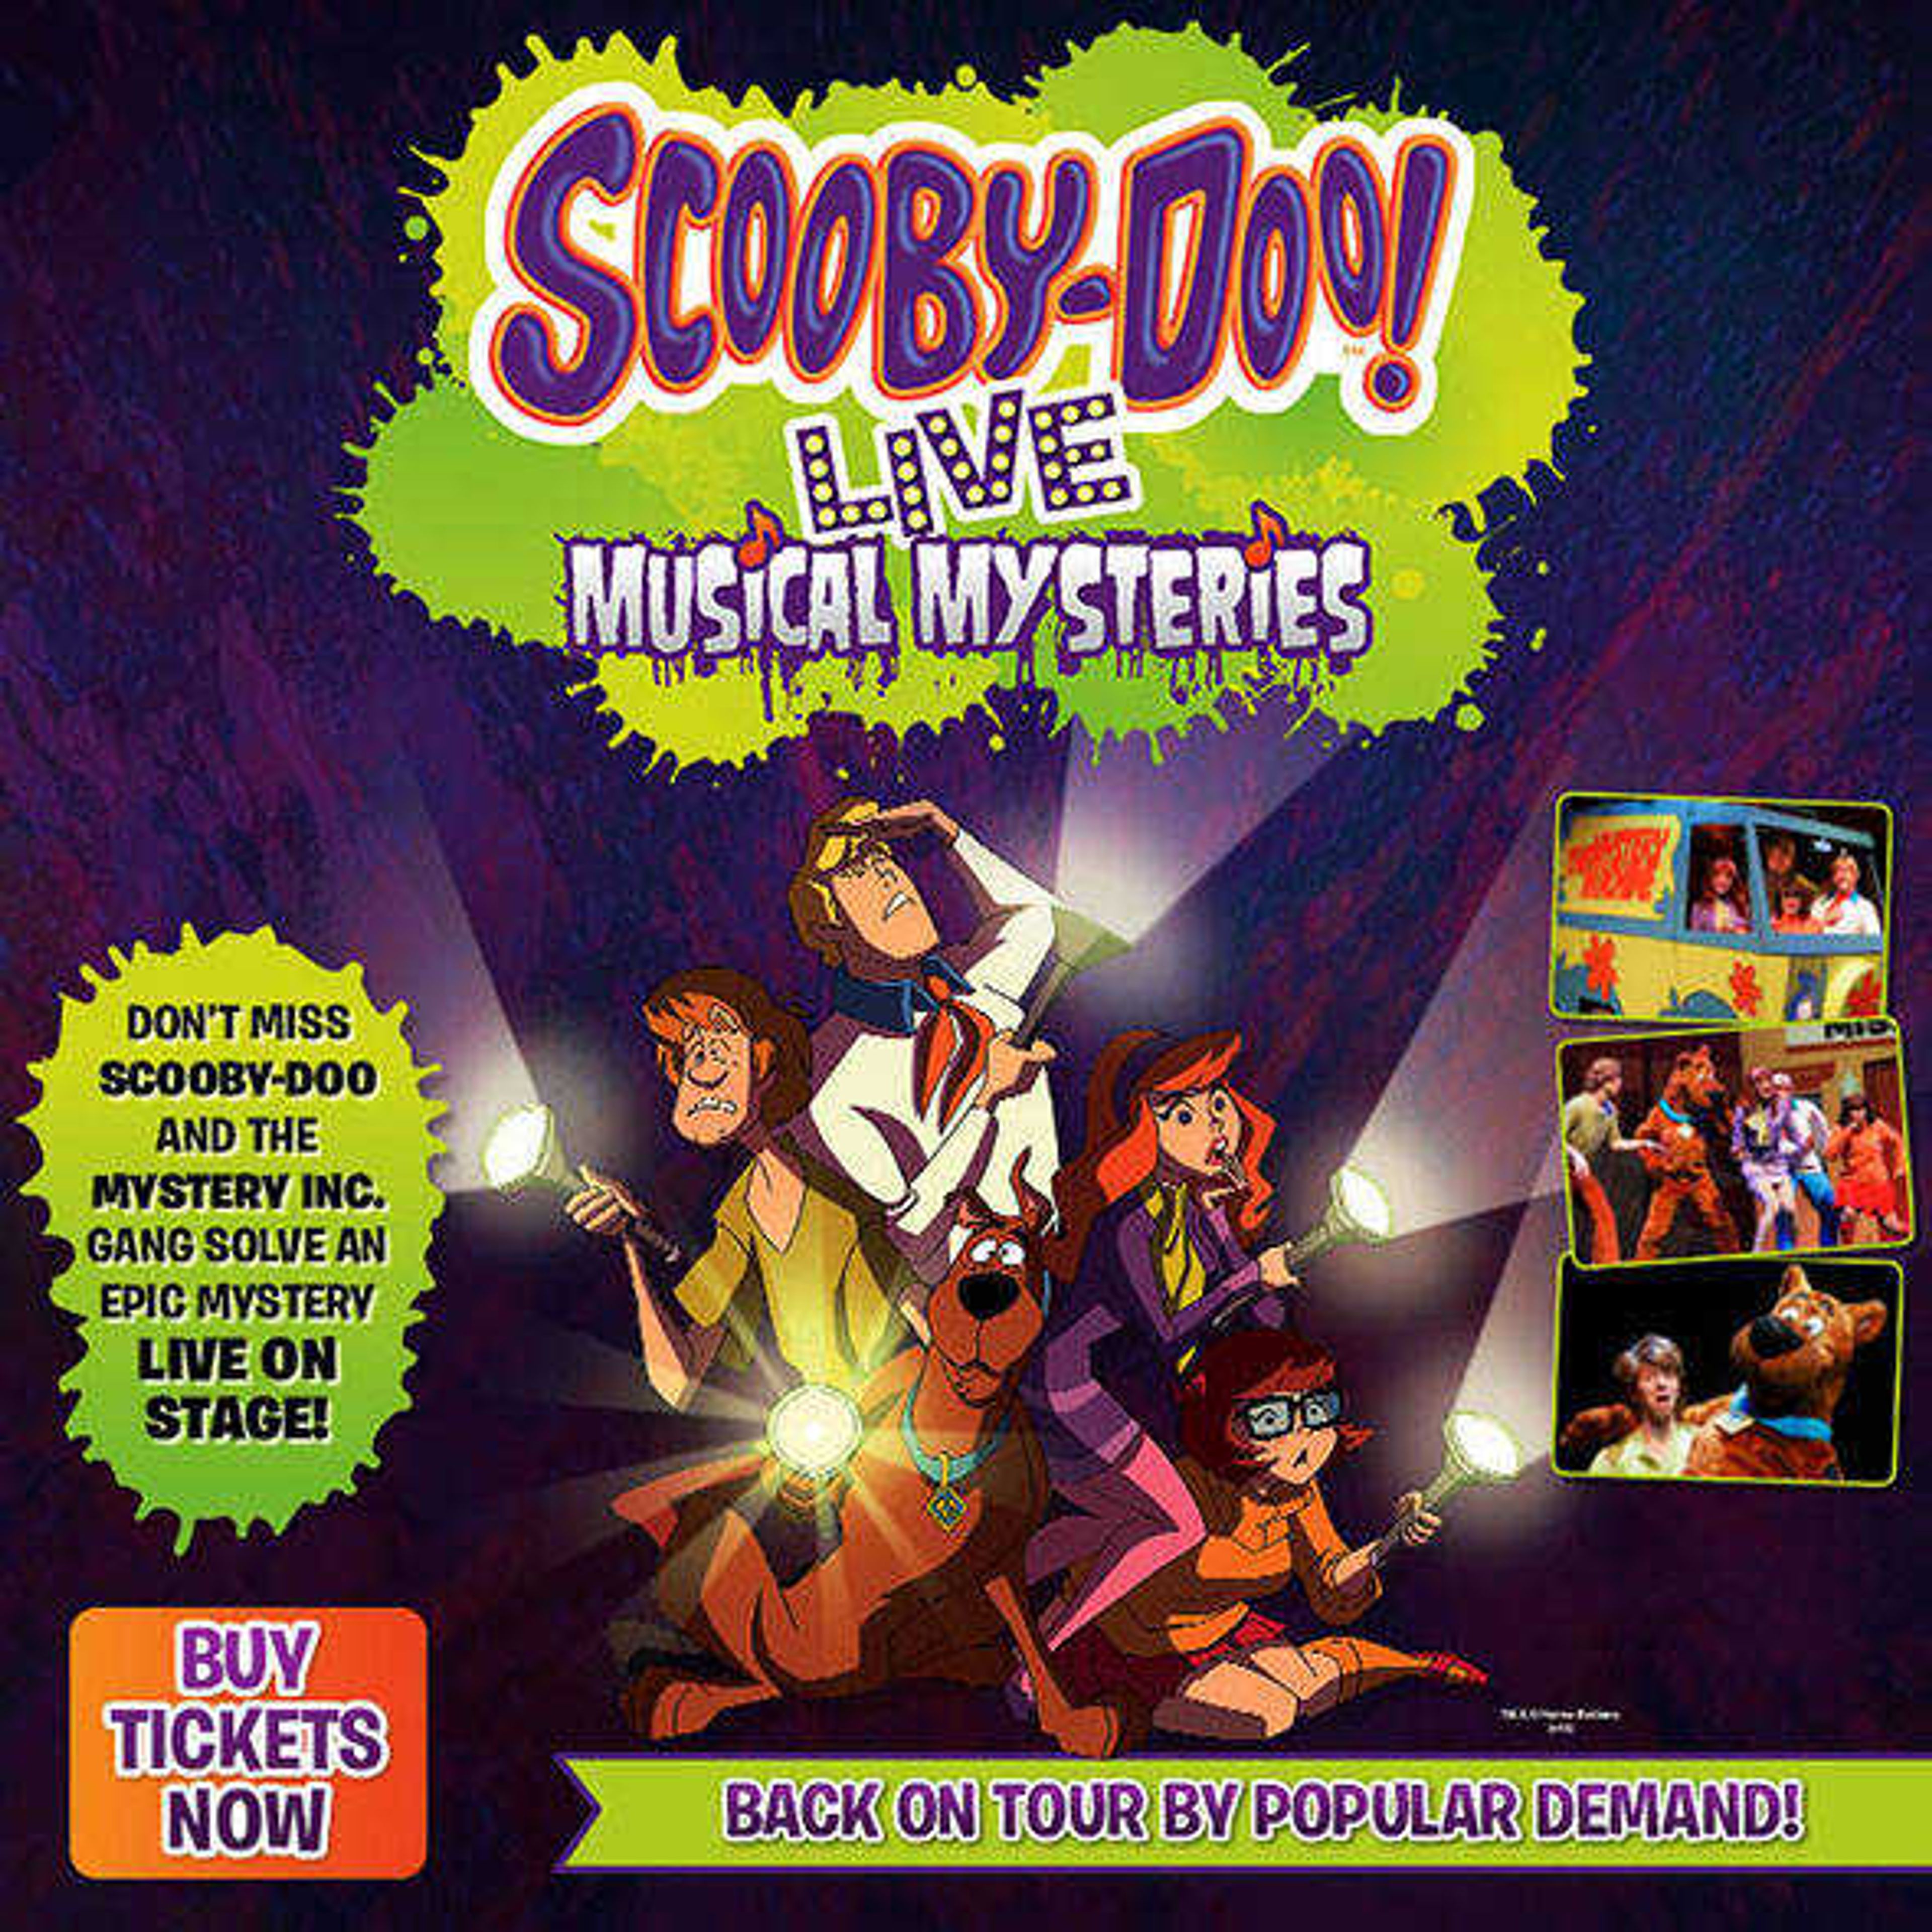 Scooby-Doo comes to life on-stage at the Show Me Center